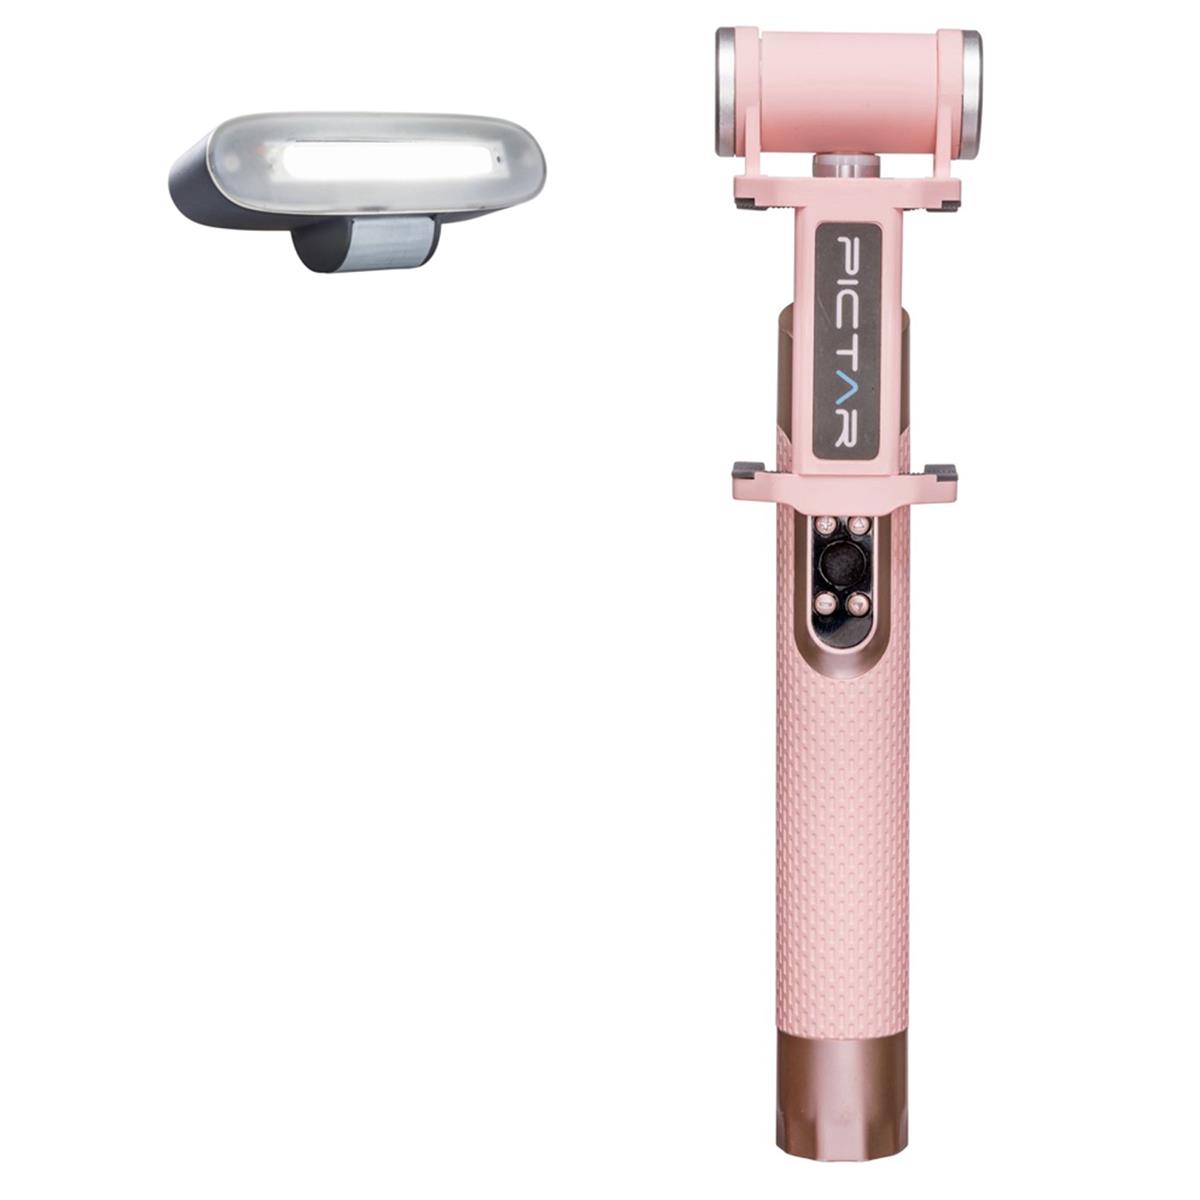 Photos - Other photo accessories Pictar Smart Light Selfie Stick with Rechargeable Battery, Millennial Pink